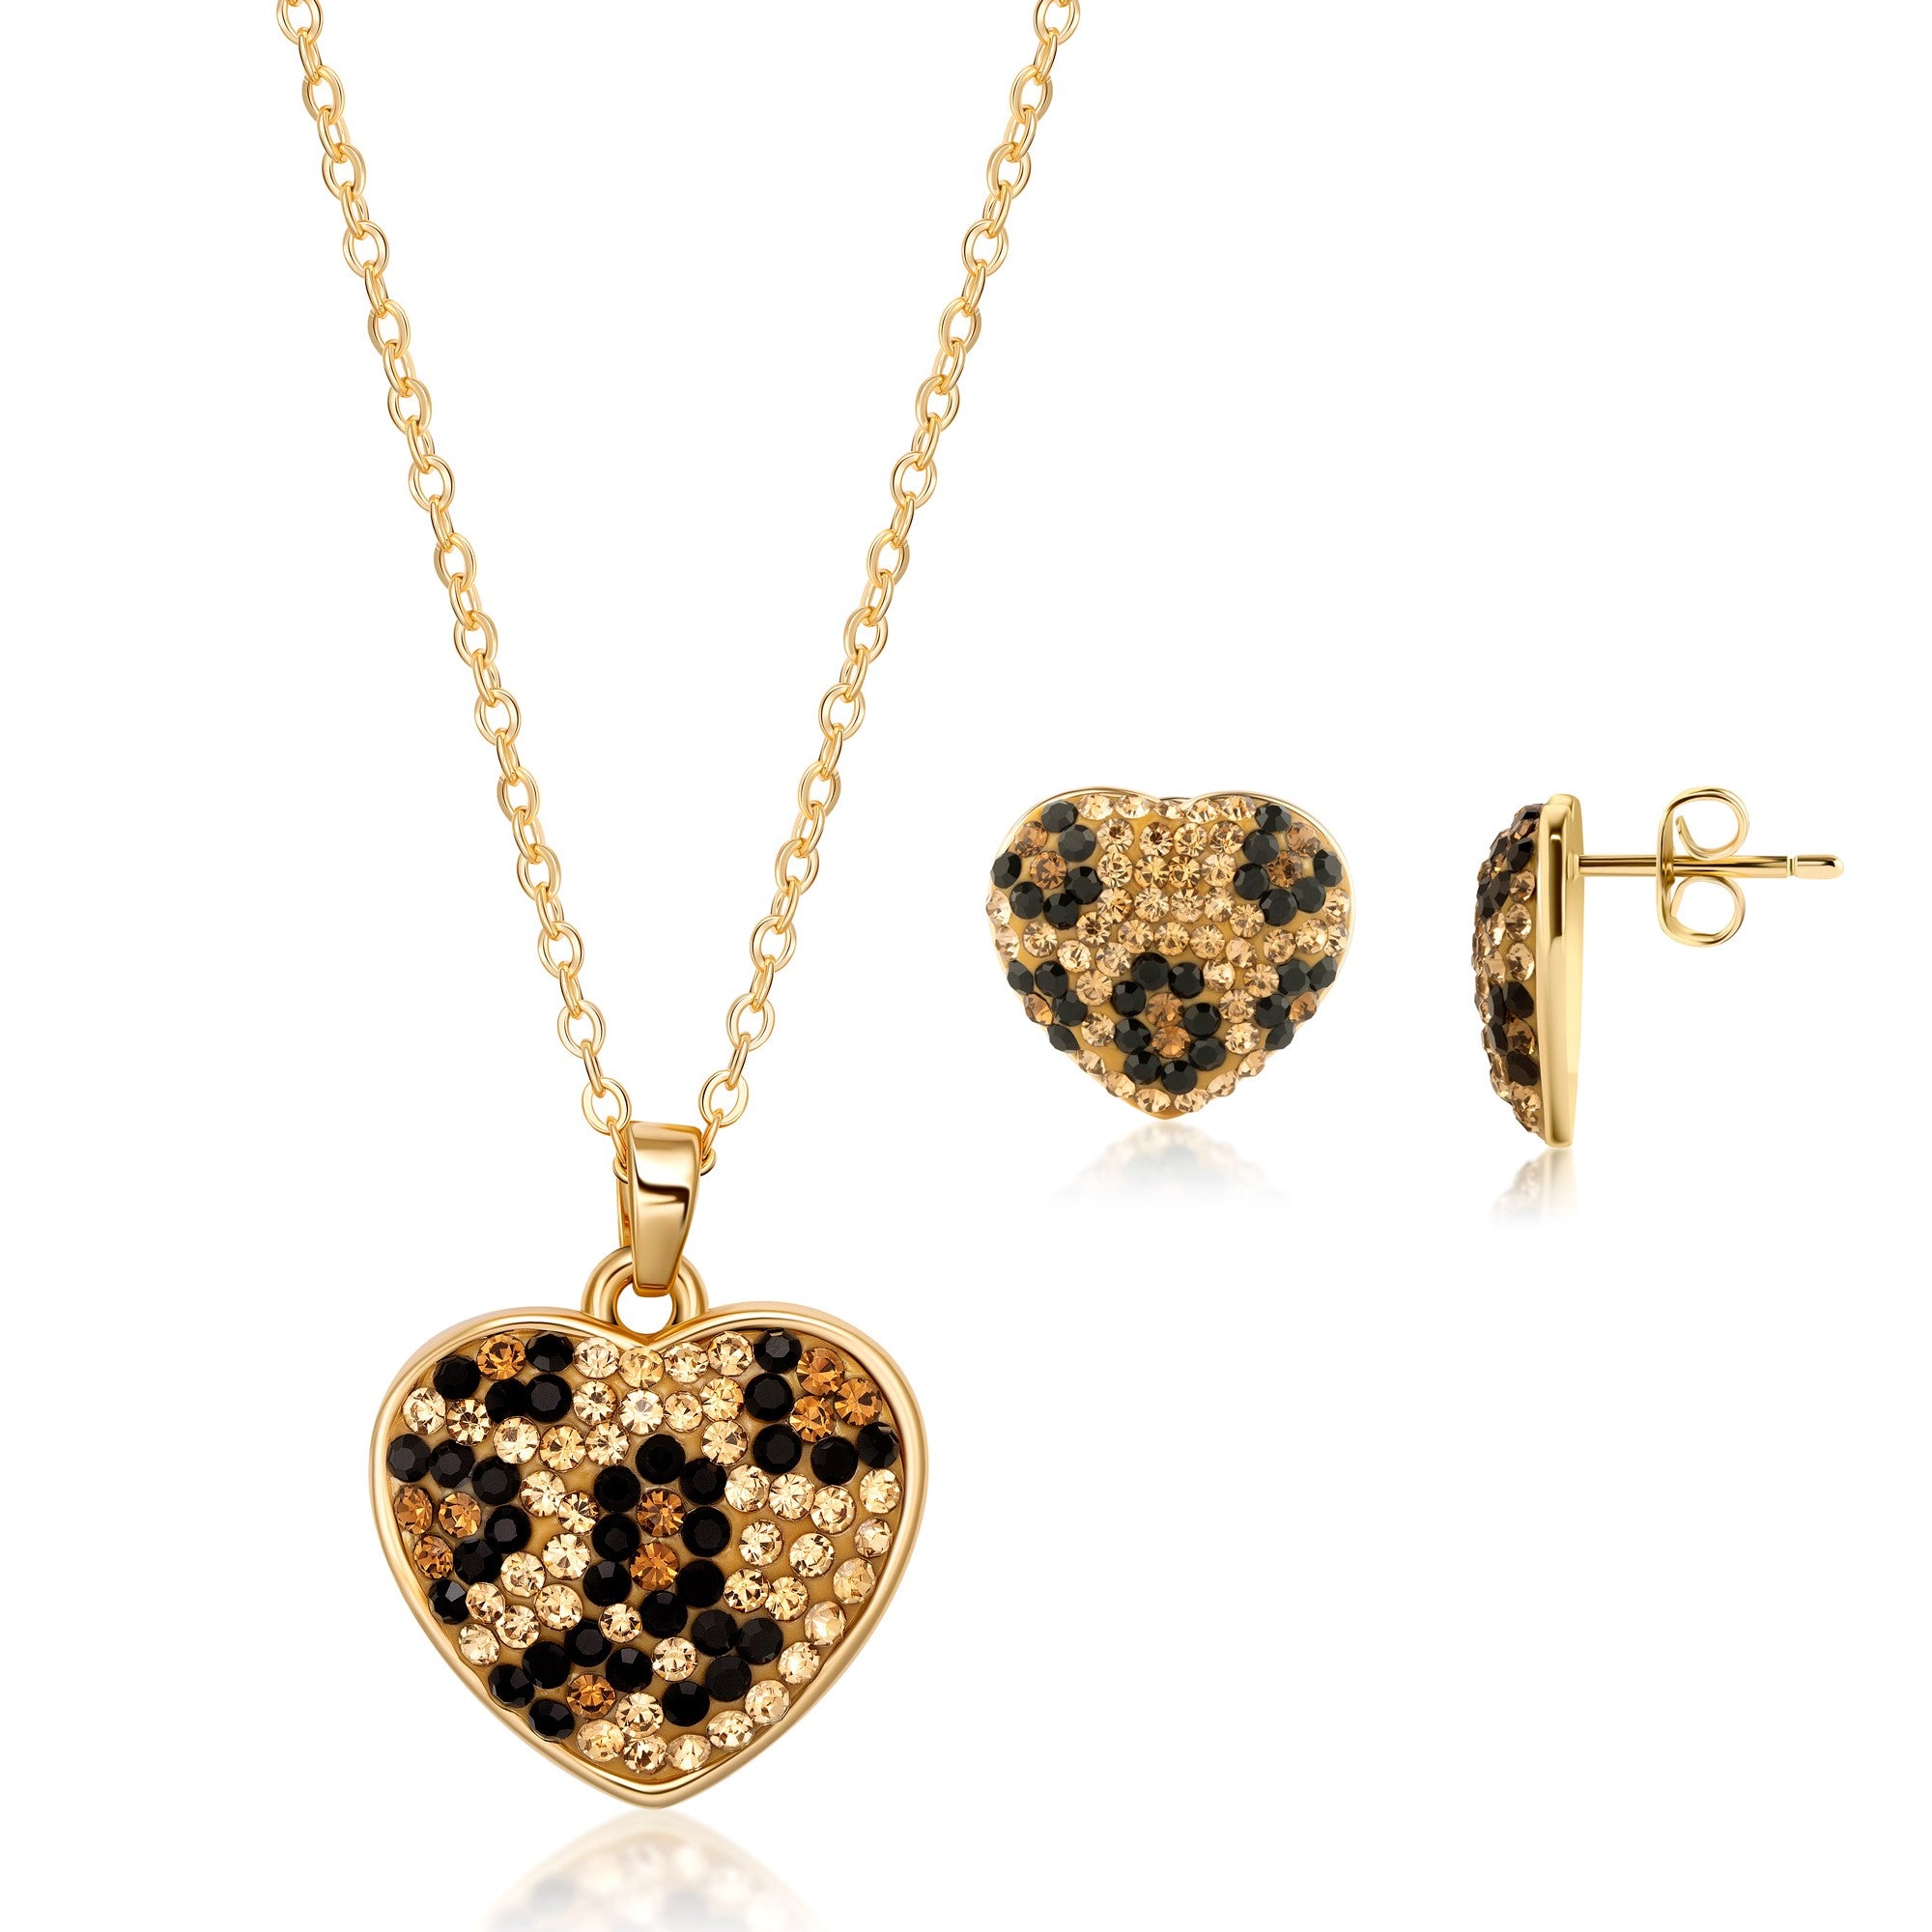 18K Gold Plated Leopard Heart Earring & Necklace Set with Austrian Crystals 18 Inches with 2 Inch Extension